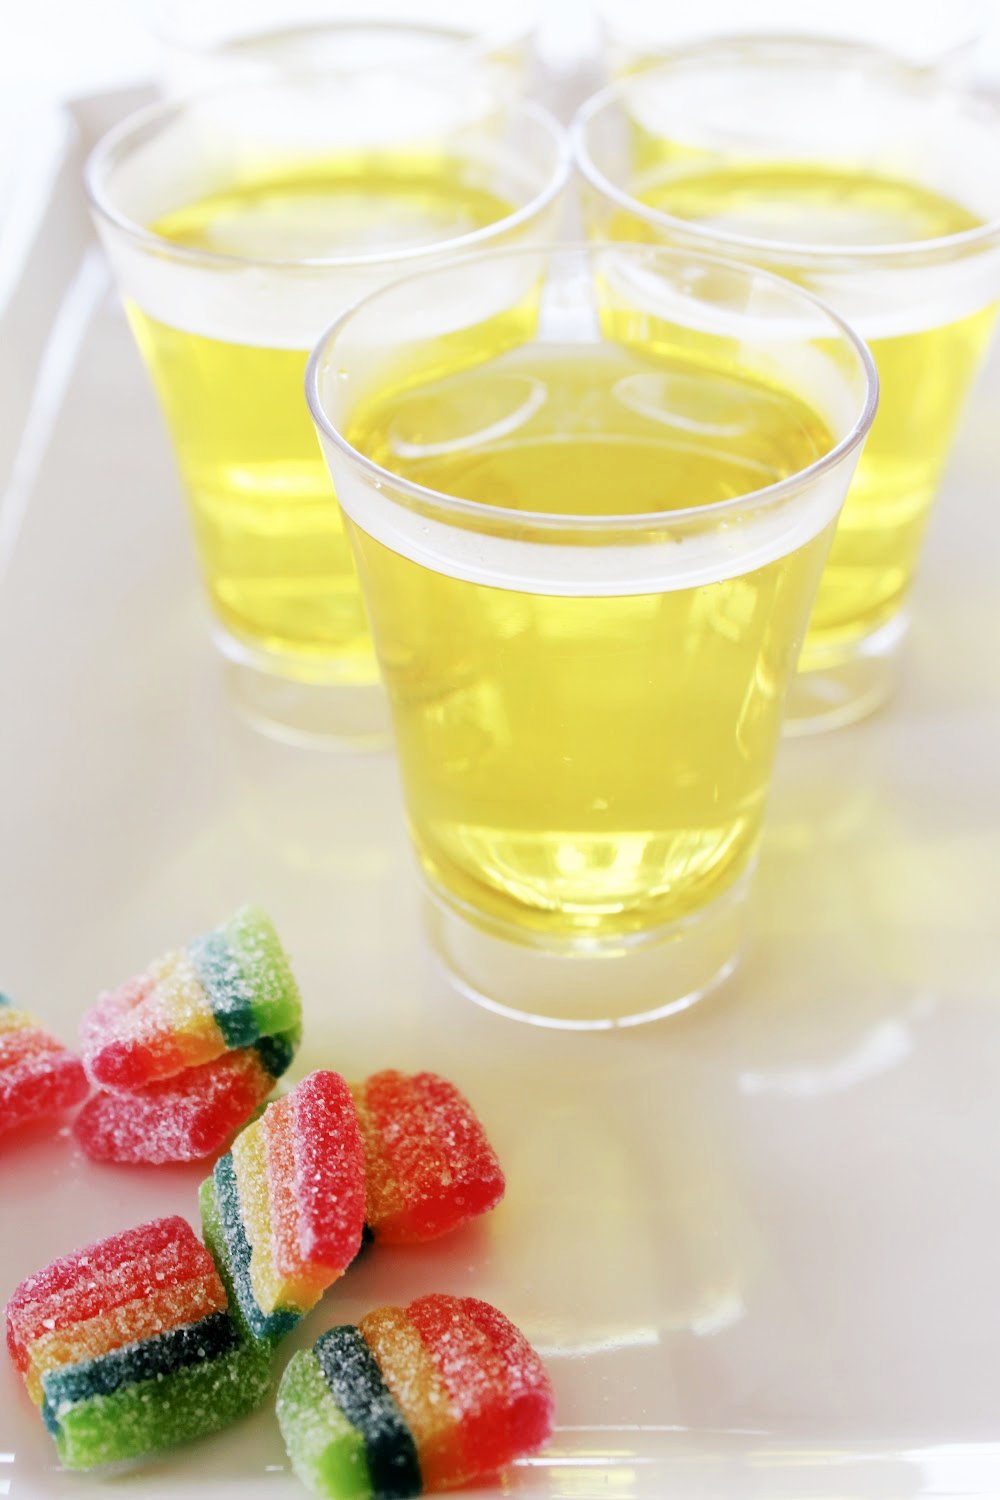 Pineapple jello shots with rainbow candy sitting beside the shot cups.